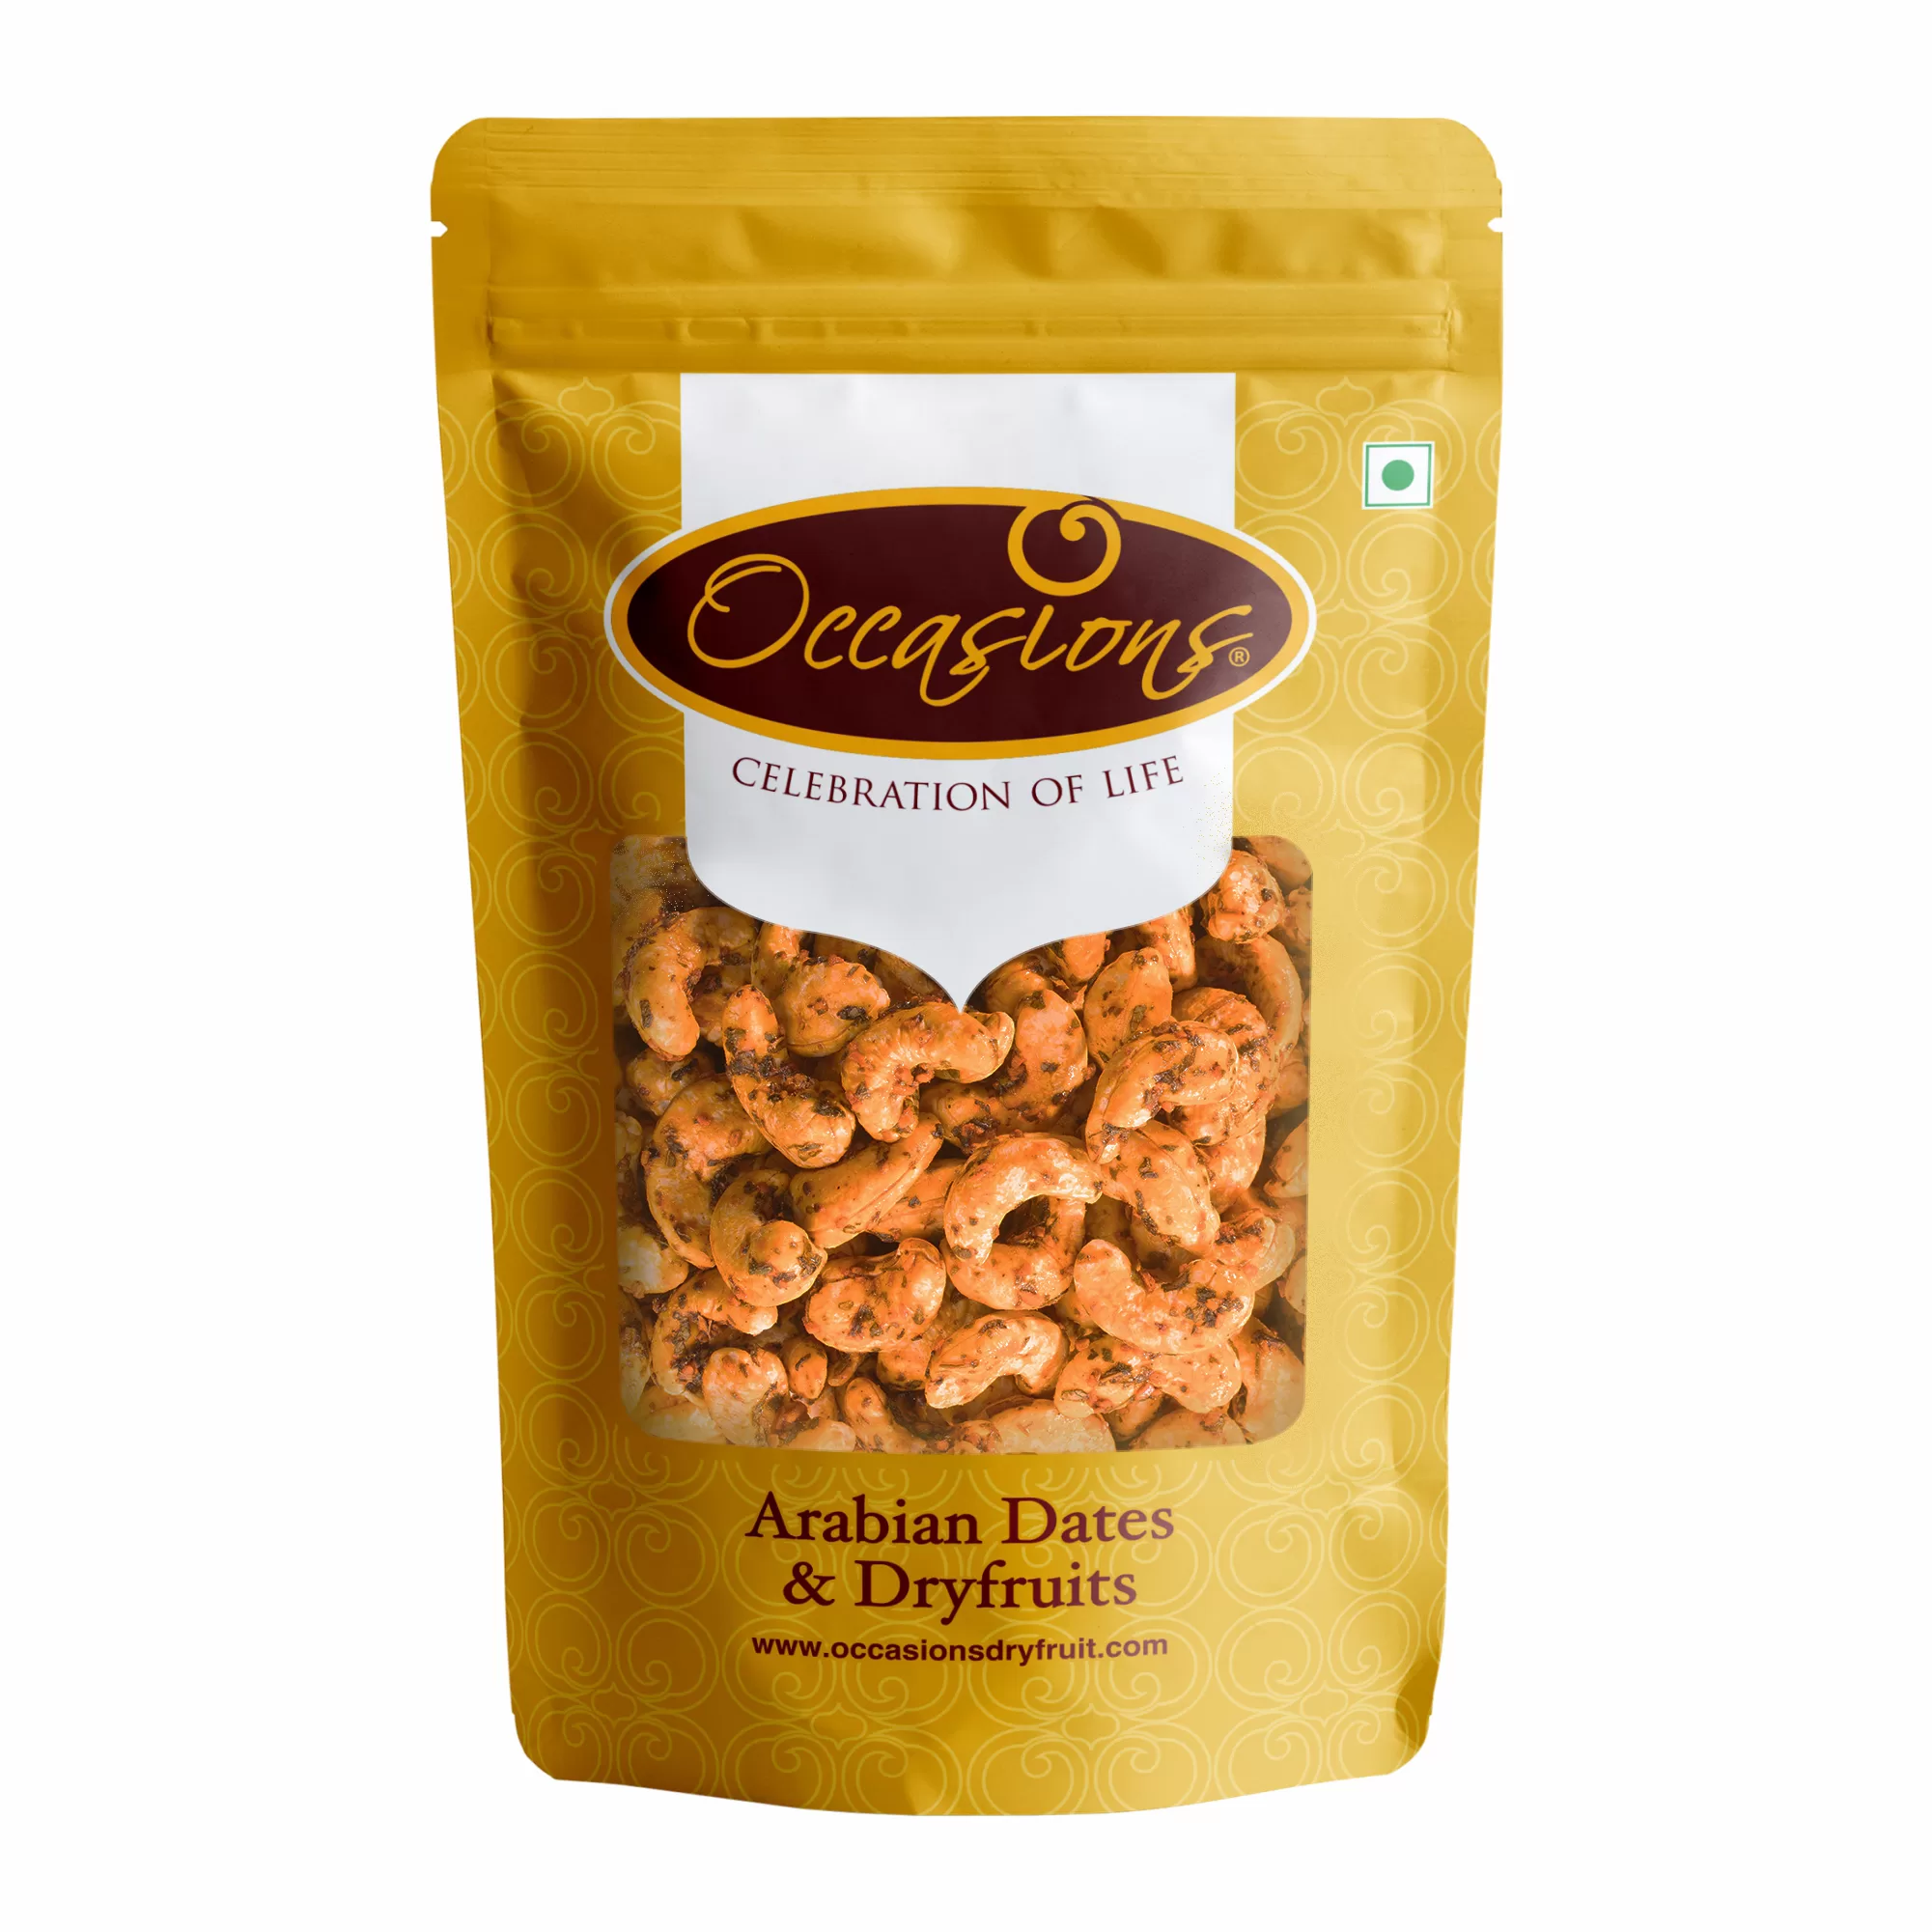 Garlic Flavoured Cashewnuts - Plant-based cashew cheese rich in Vitamin B, Calcium, Protein, and Fiber, with more vitamins and minerals than dairy, from Occasions Dry Fruit